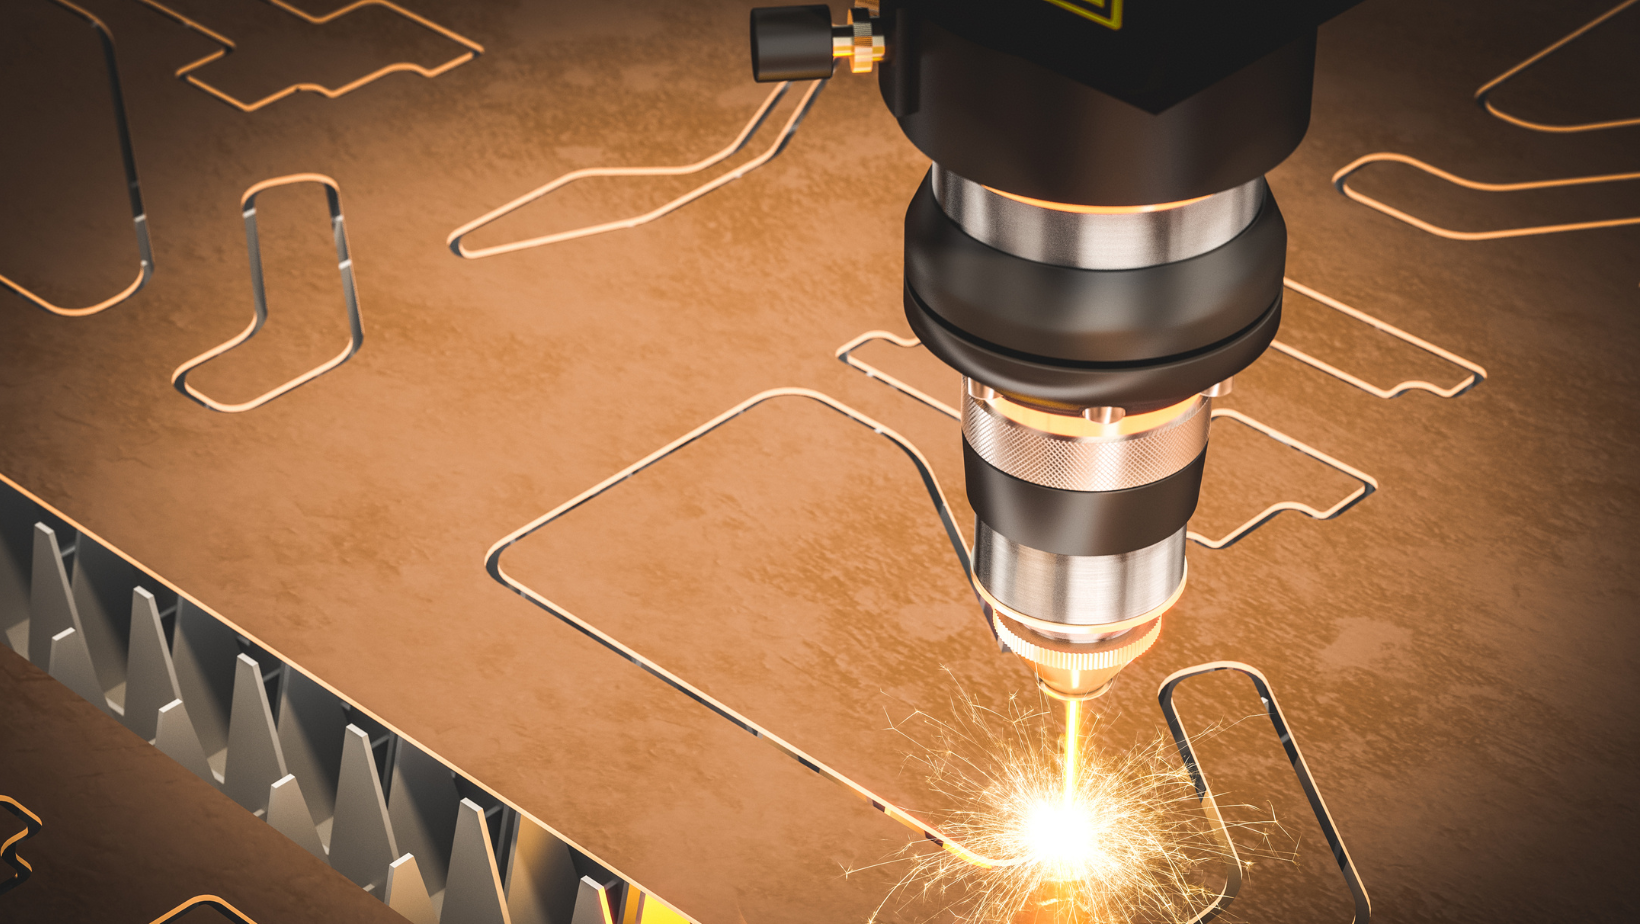 Advanced plasma cutting machine utilizing specialty gases for precise metal shaping from Metro Welding Supply Corp.